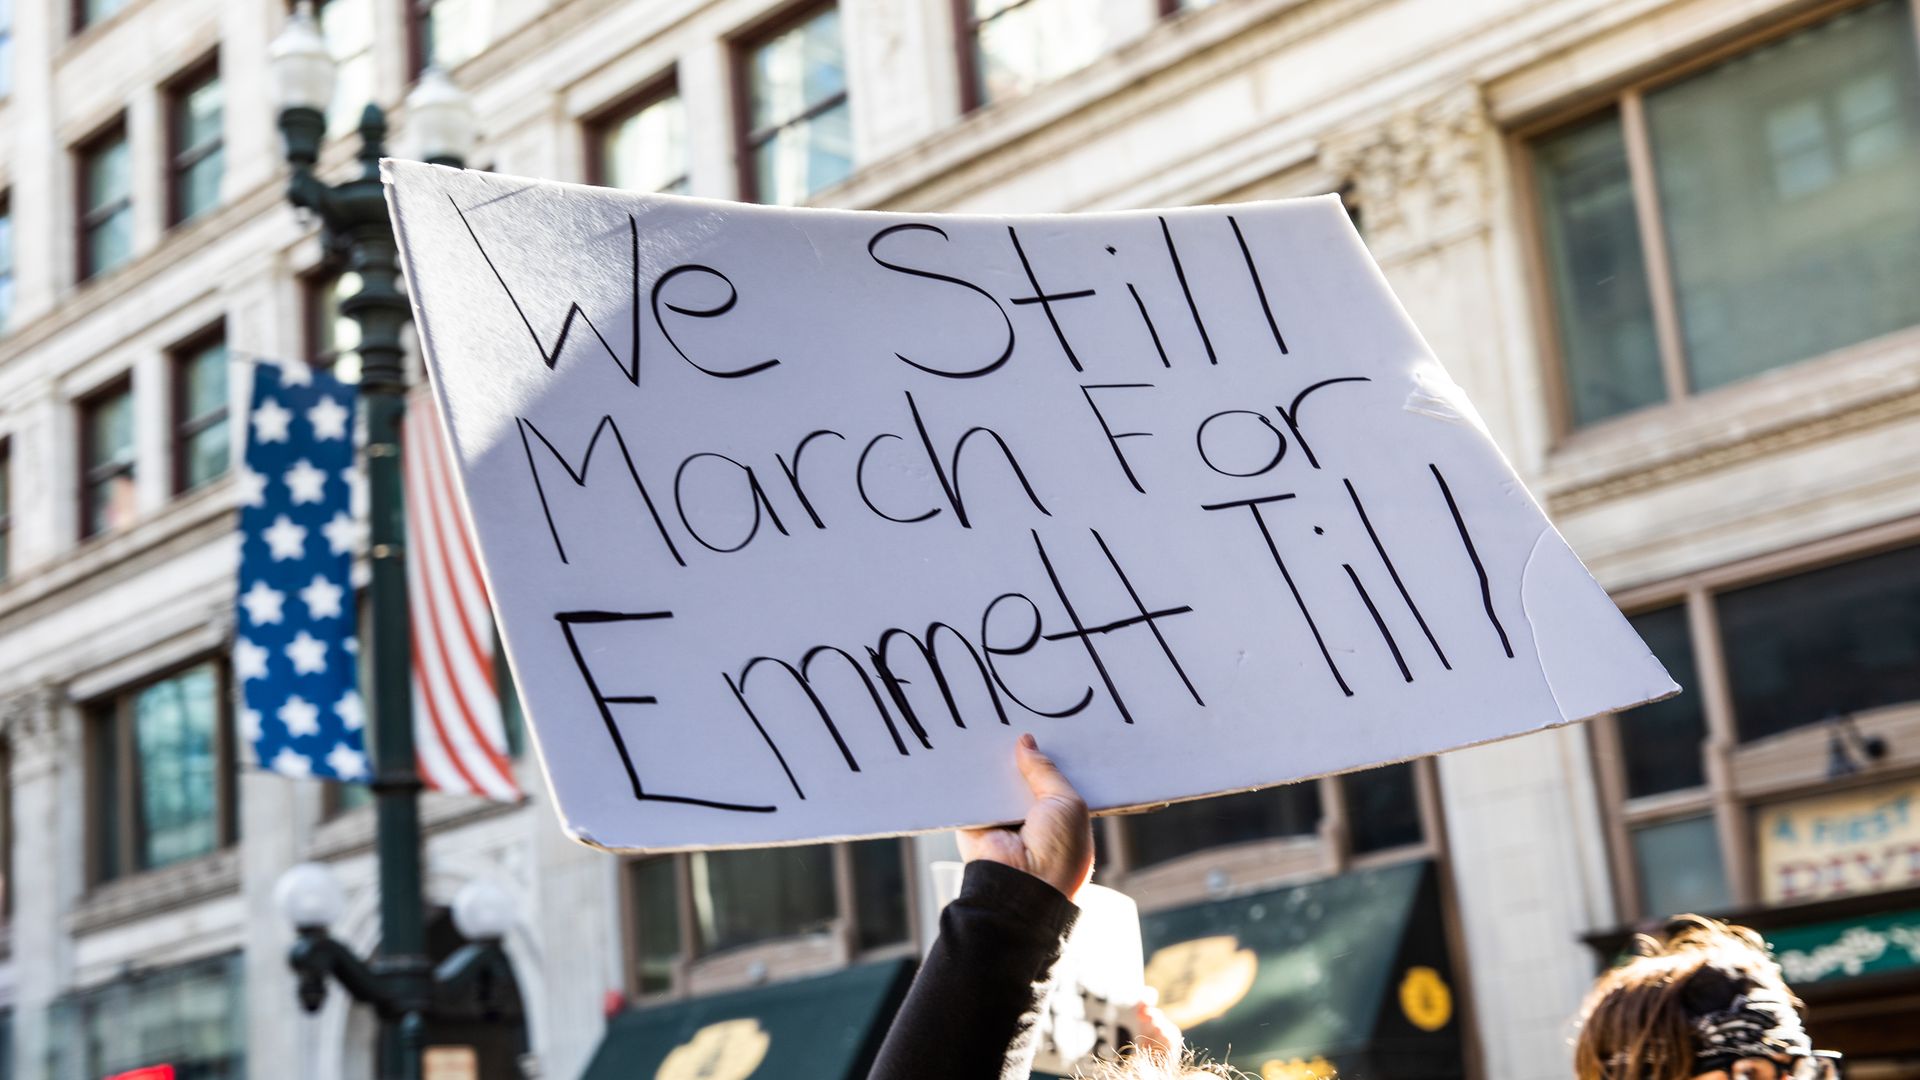 Photo of a protester holding a sign that says "We still march for Emmett Till" at a rally outdoors